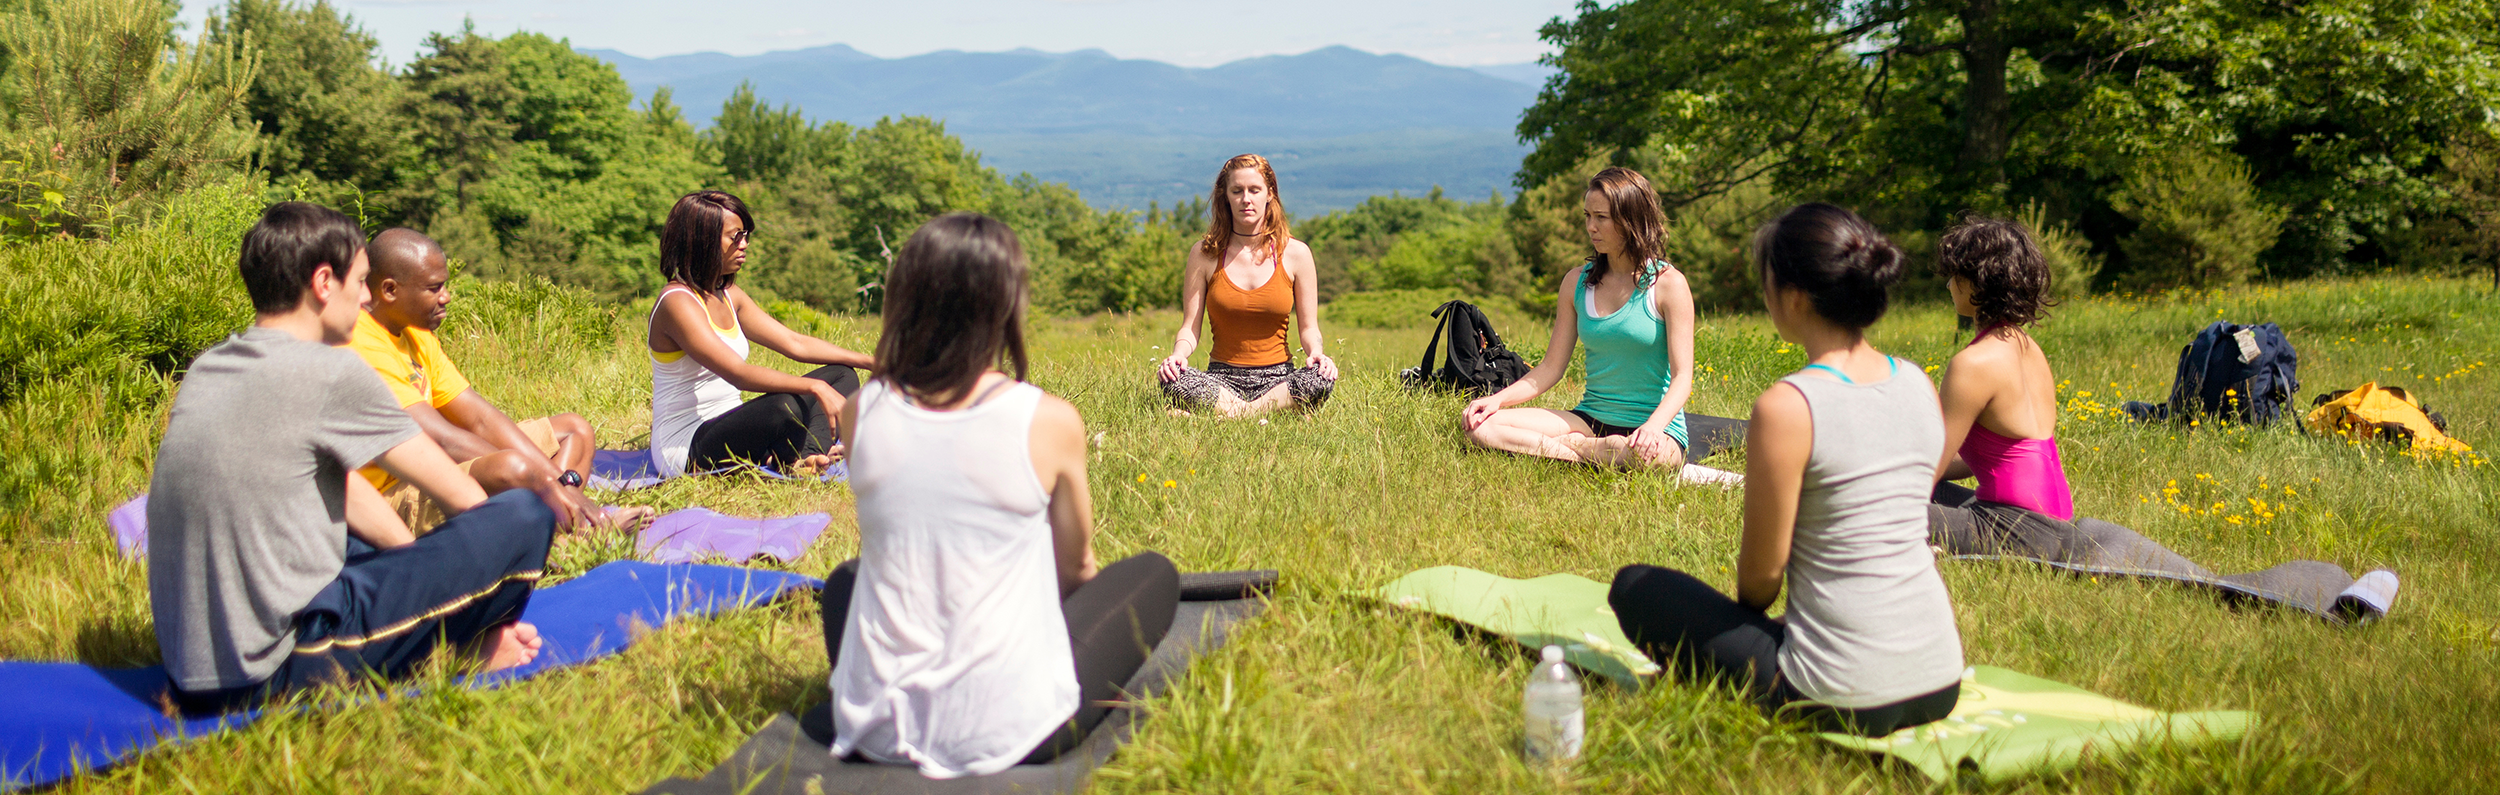 Group of people meditating outdoor.